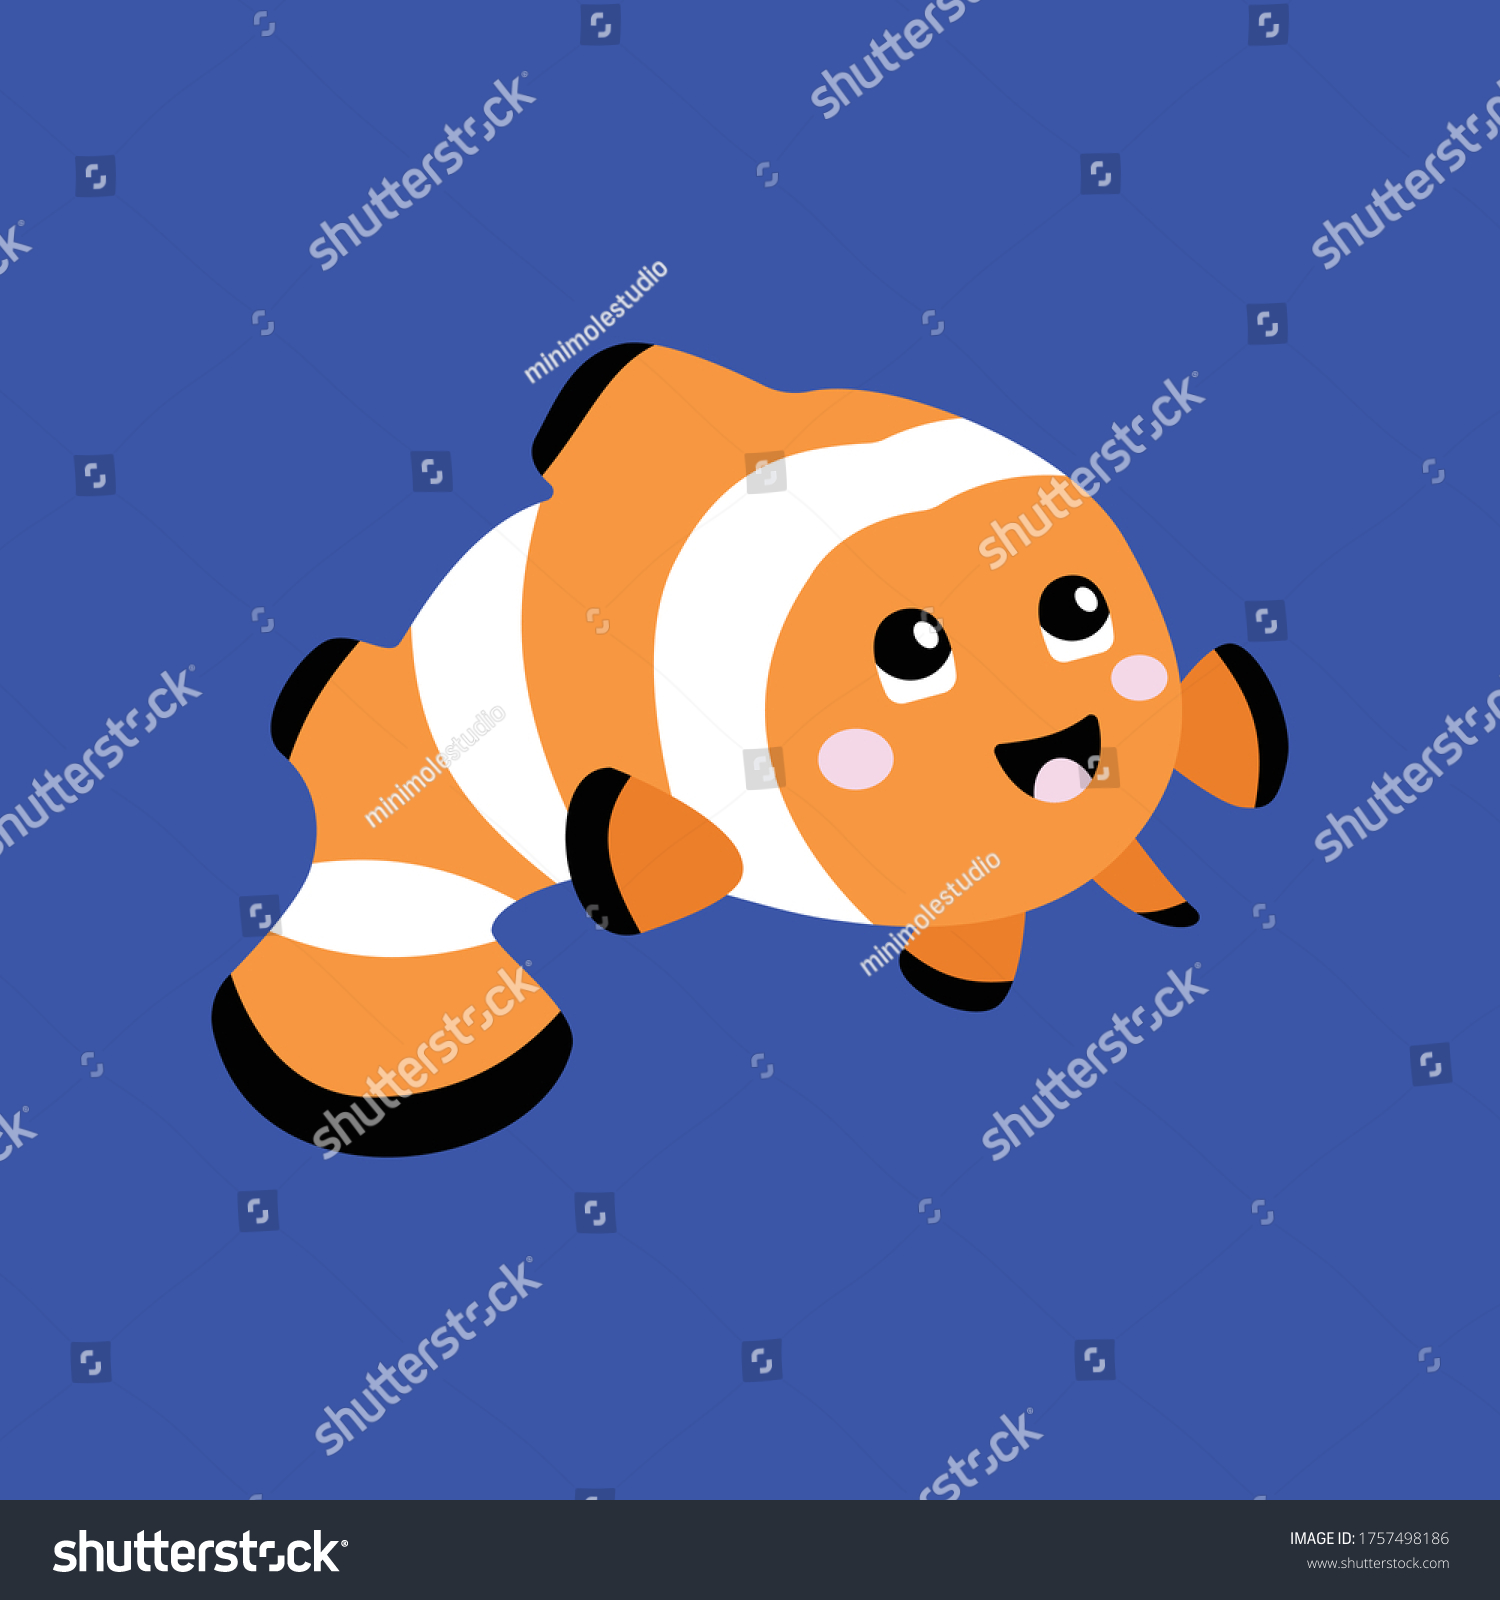 SVG of Vector illustration of a clownfish with a cute face. Simple, flat kawaii style. svg